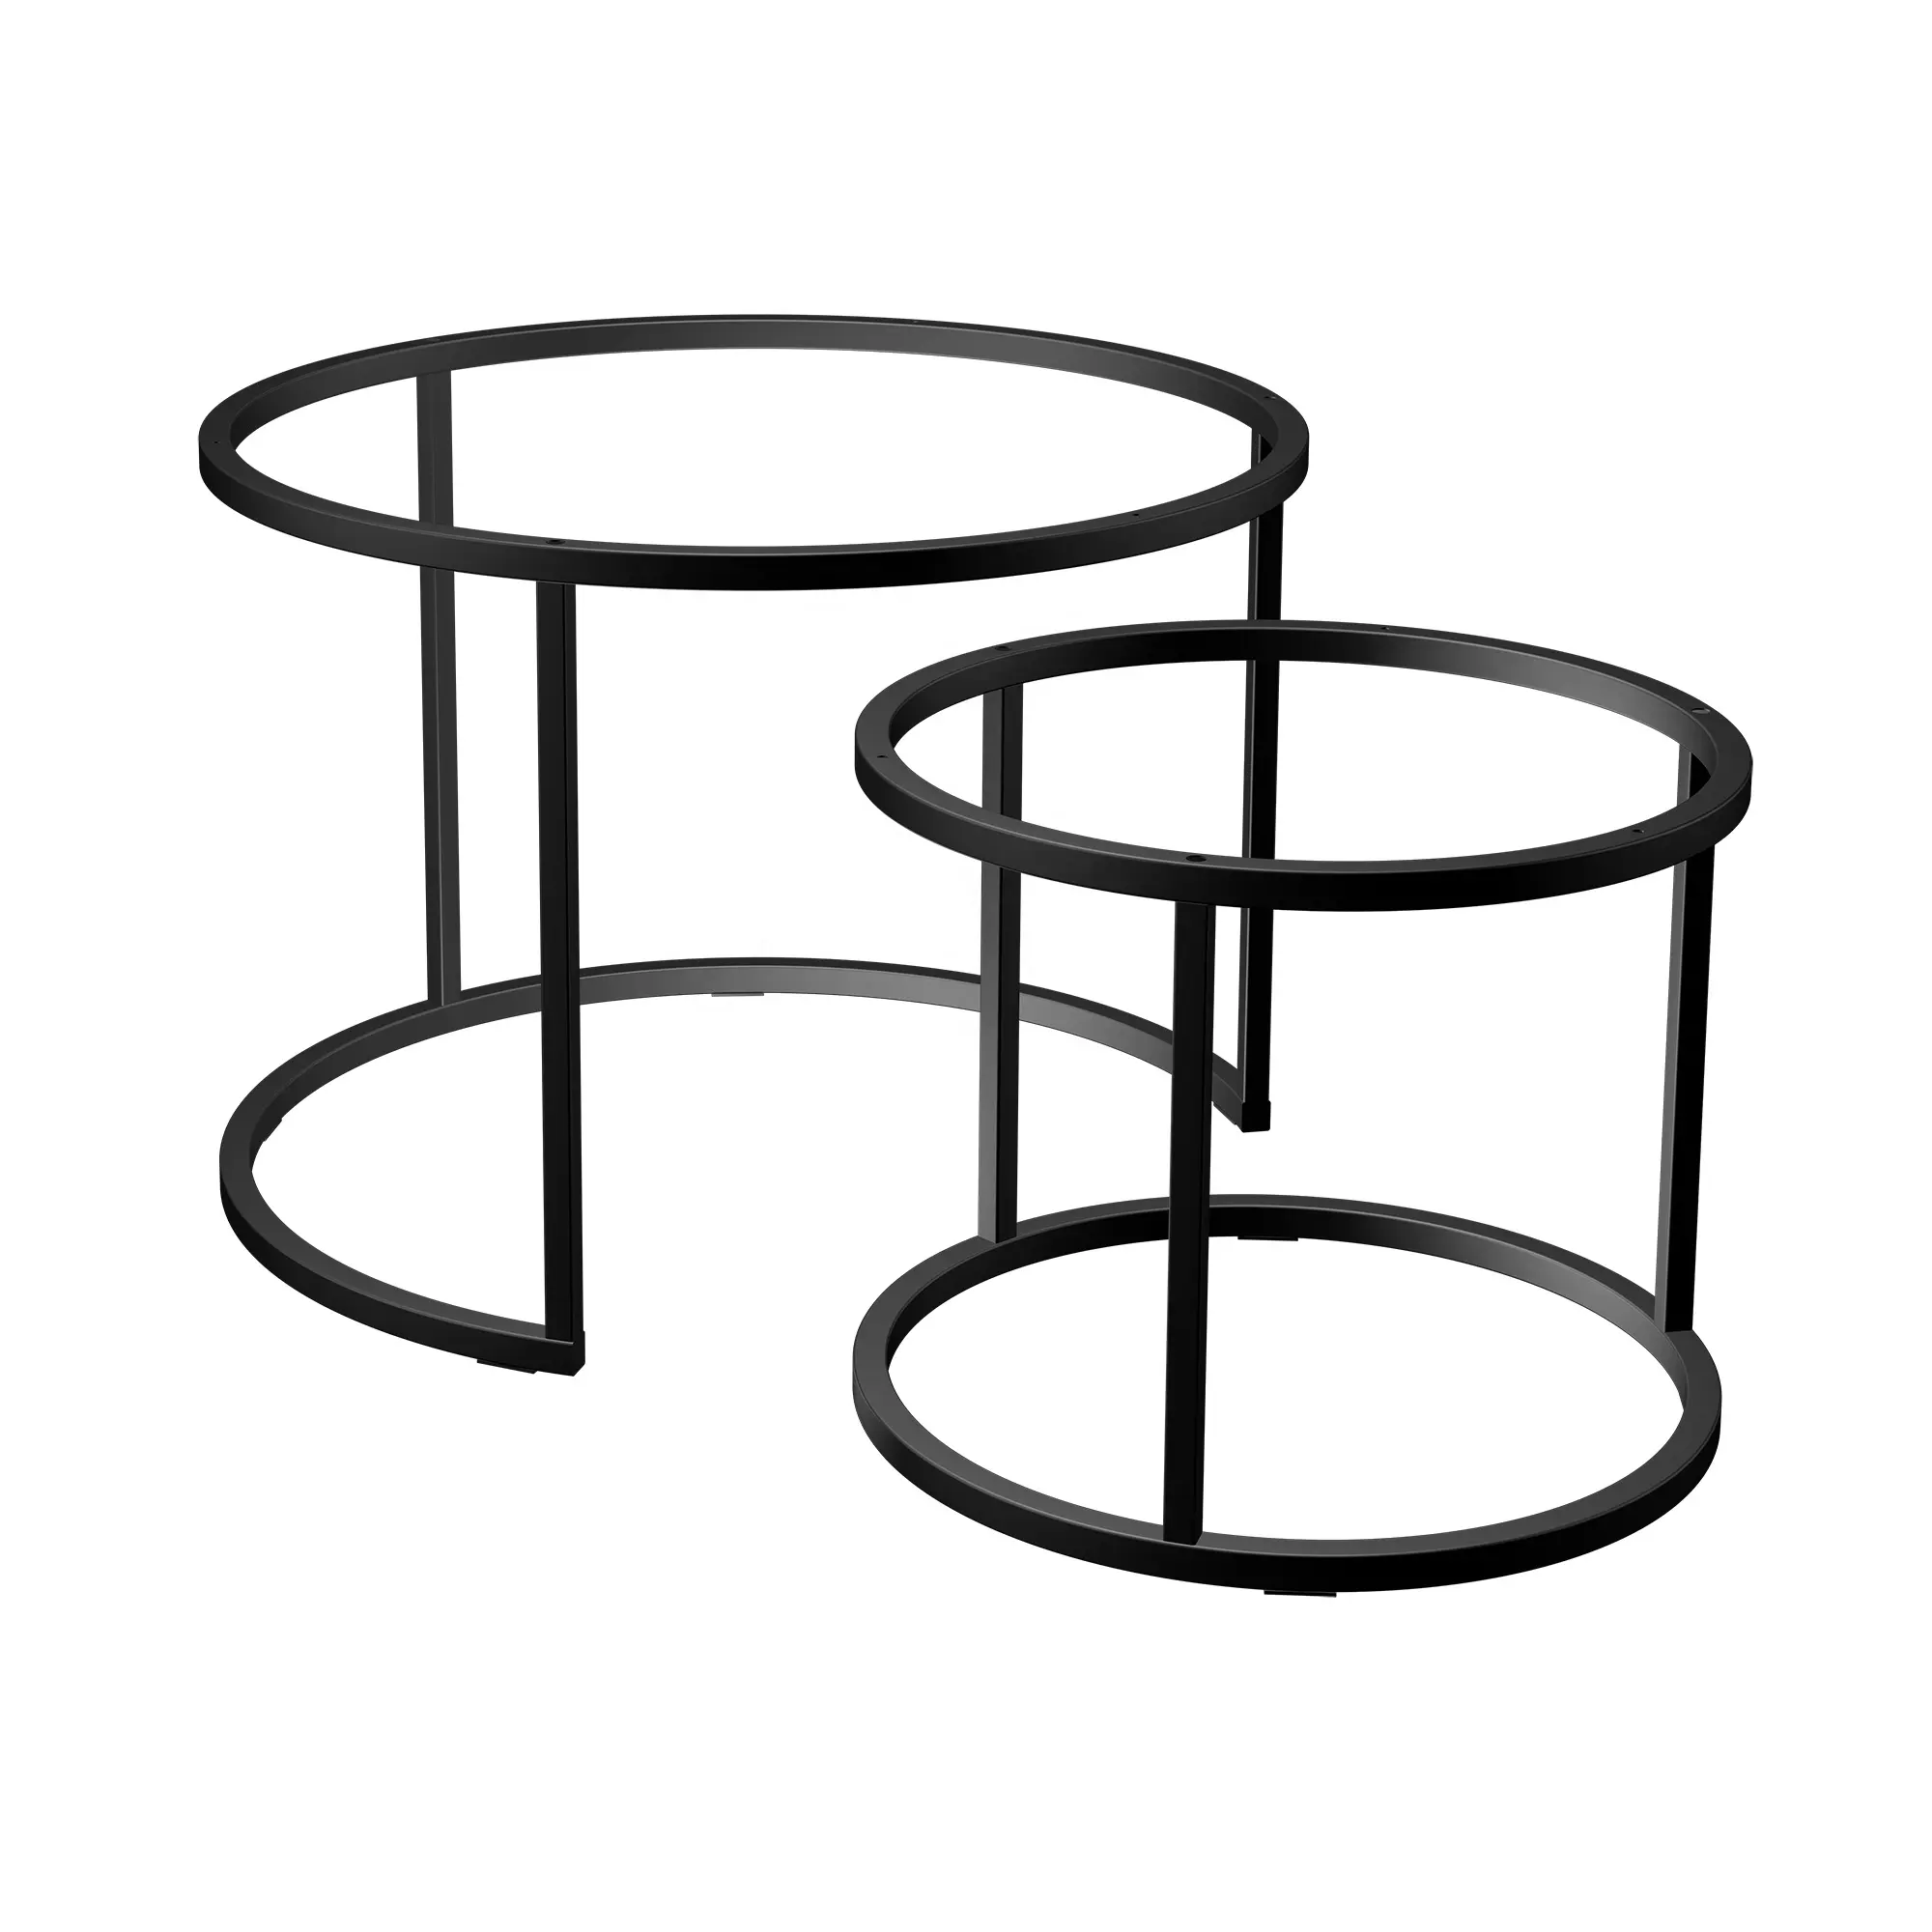 High Quality Cast Iron Double Table Frame For Coffee Tables Round Shape Coffee Table Legs